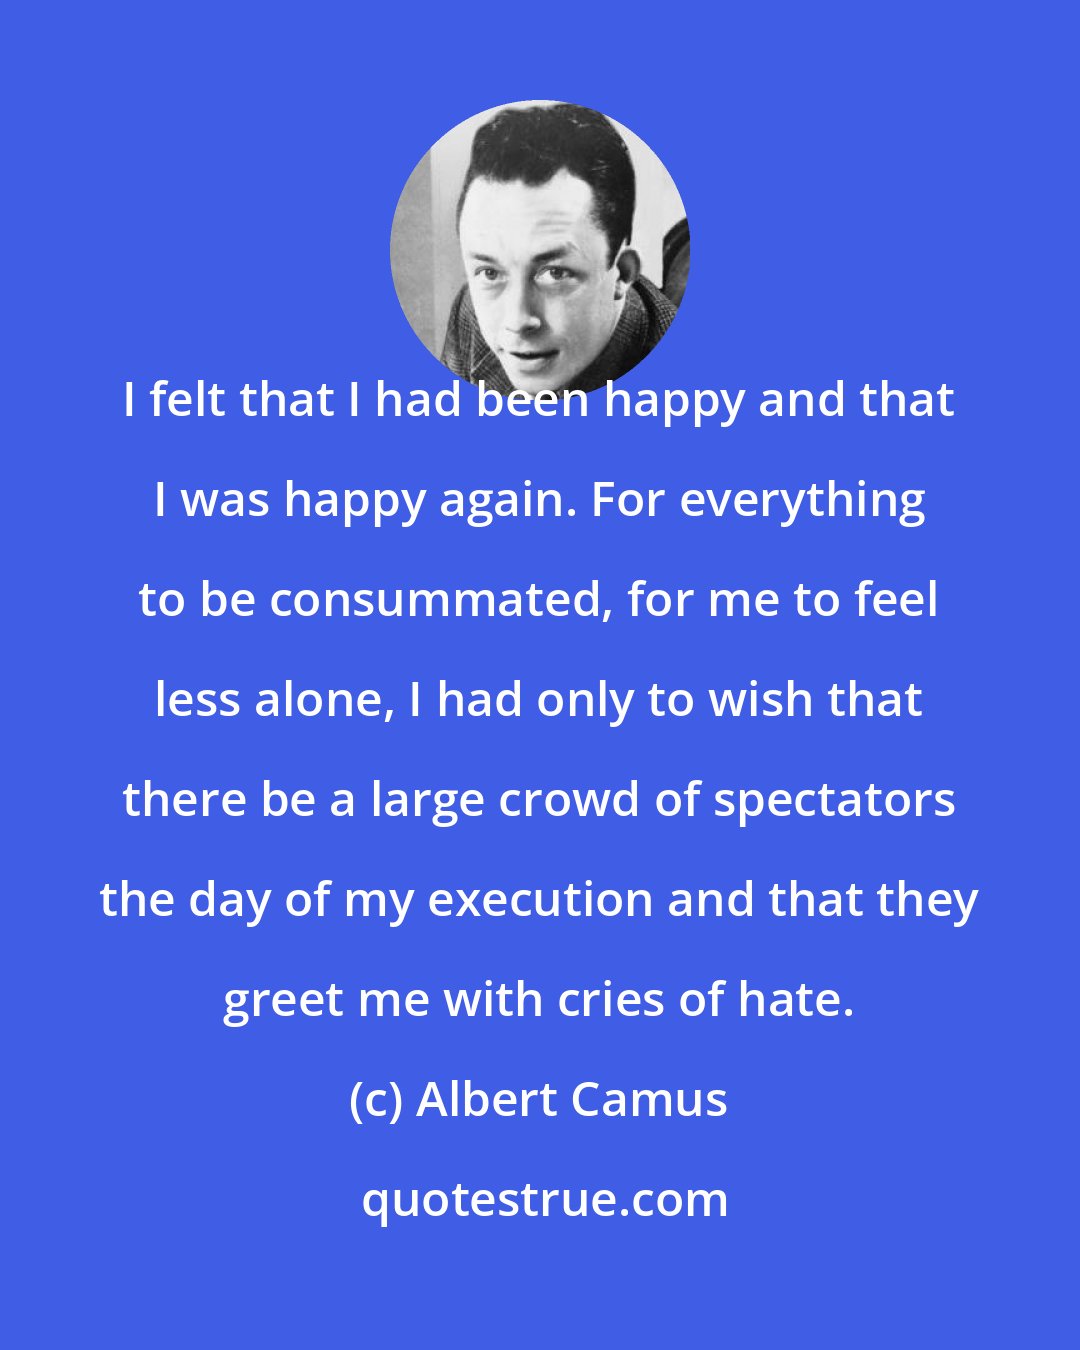 Albert Camus: I felt that I had been happy and that I was happy again. For everything to be consummated, for me to feel less alone, I had only to wish that there be a large crowd of spectators the day of my execution and that they greet me with cries of hate.